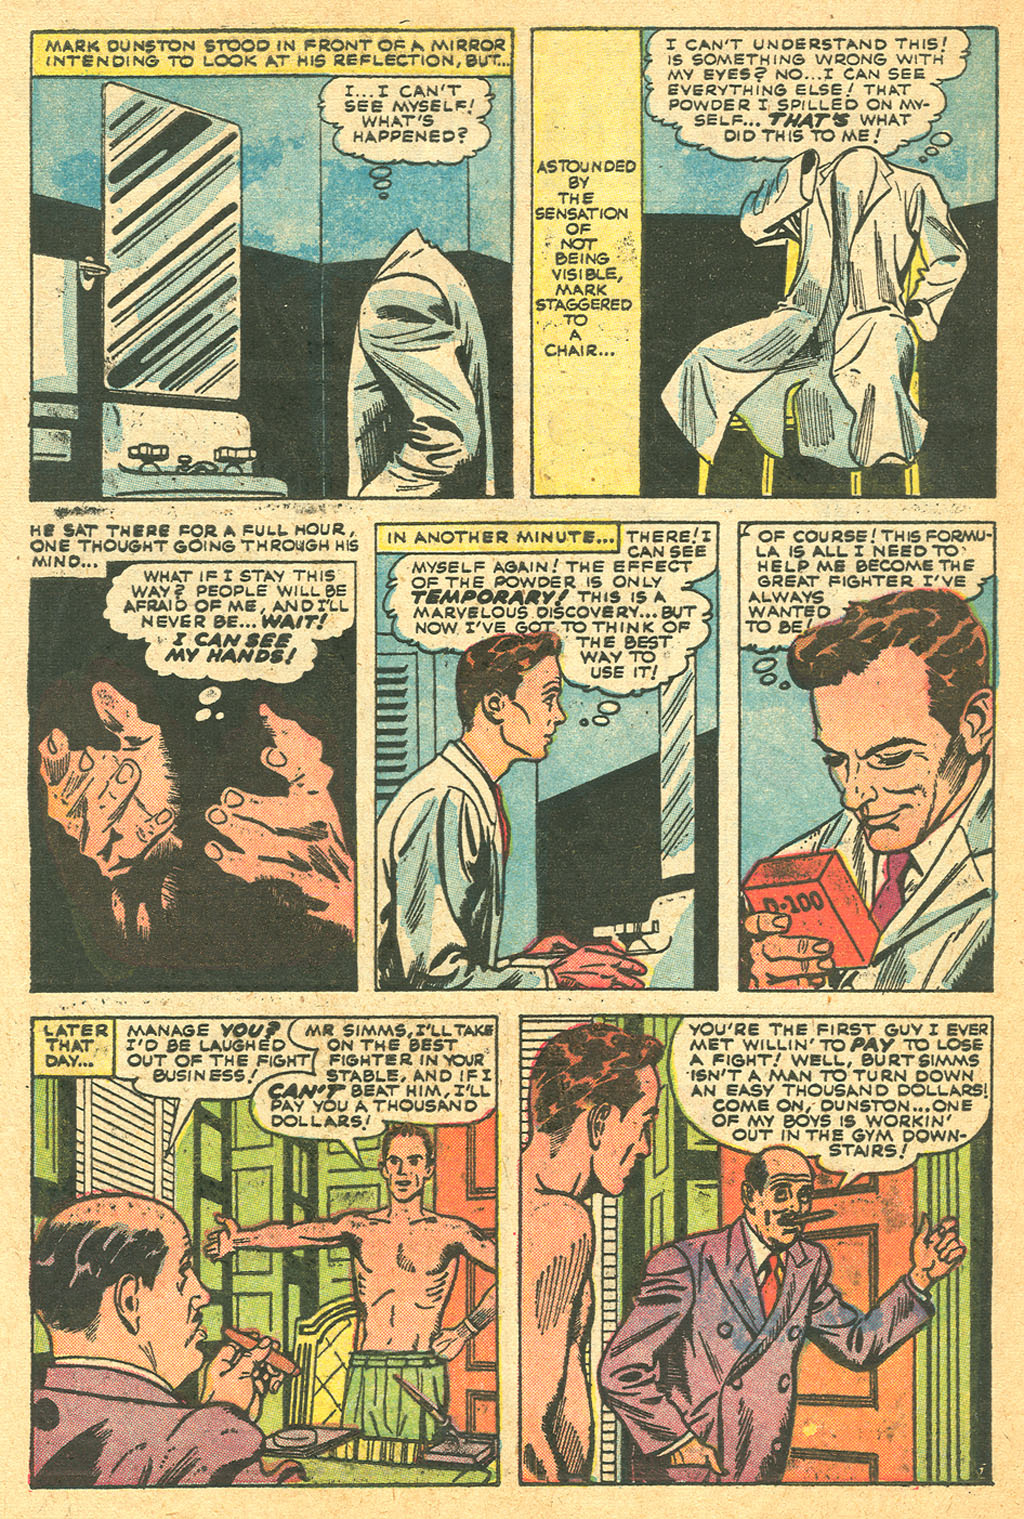 Marvel Tales (1949) 139 Page 3